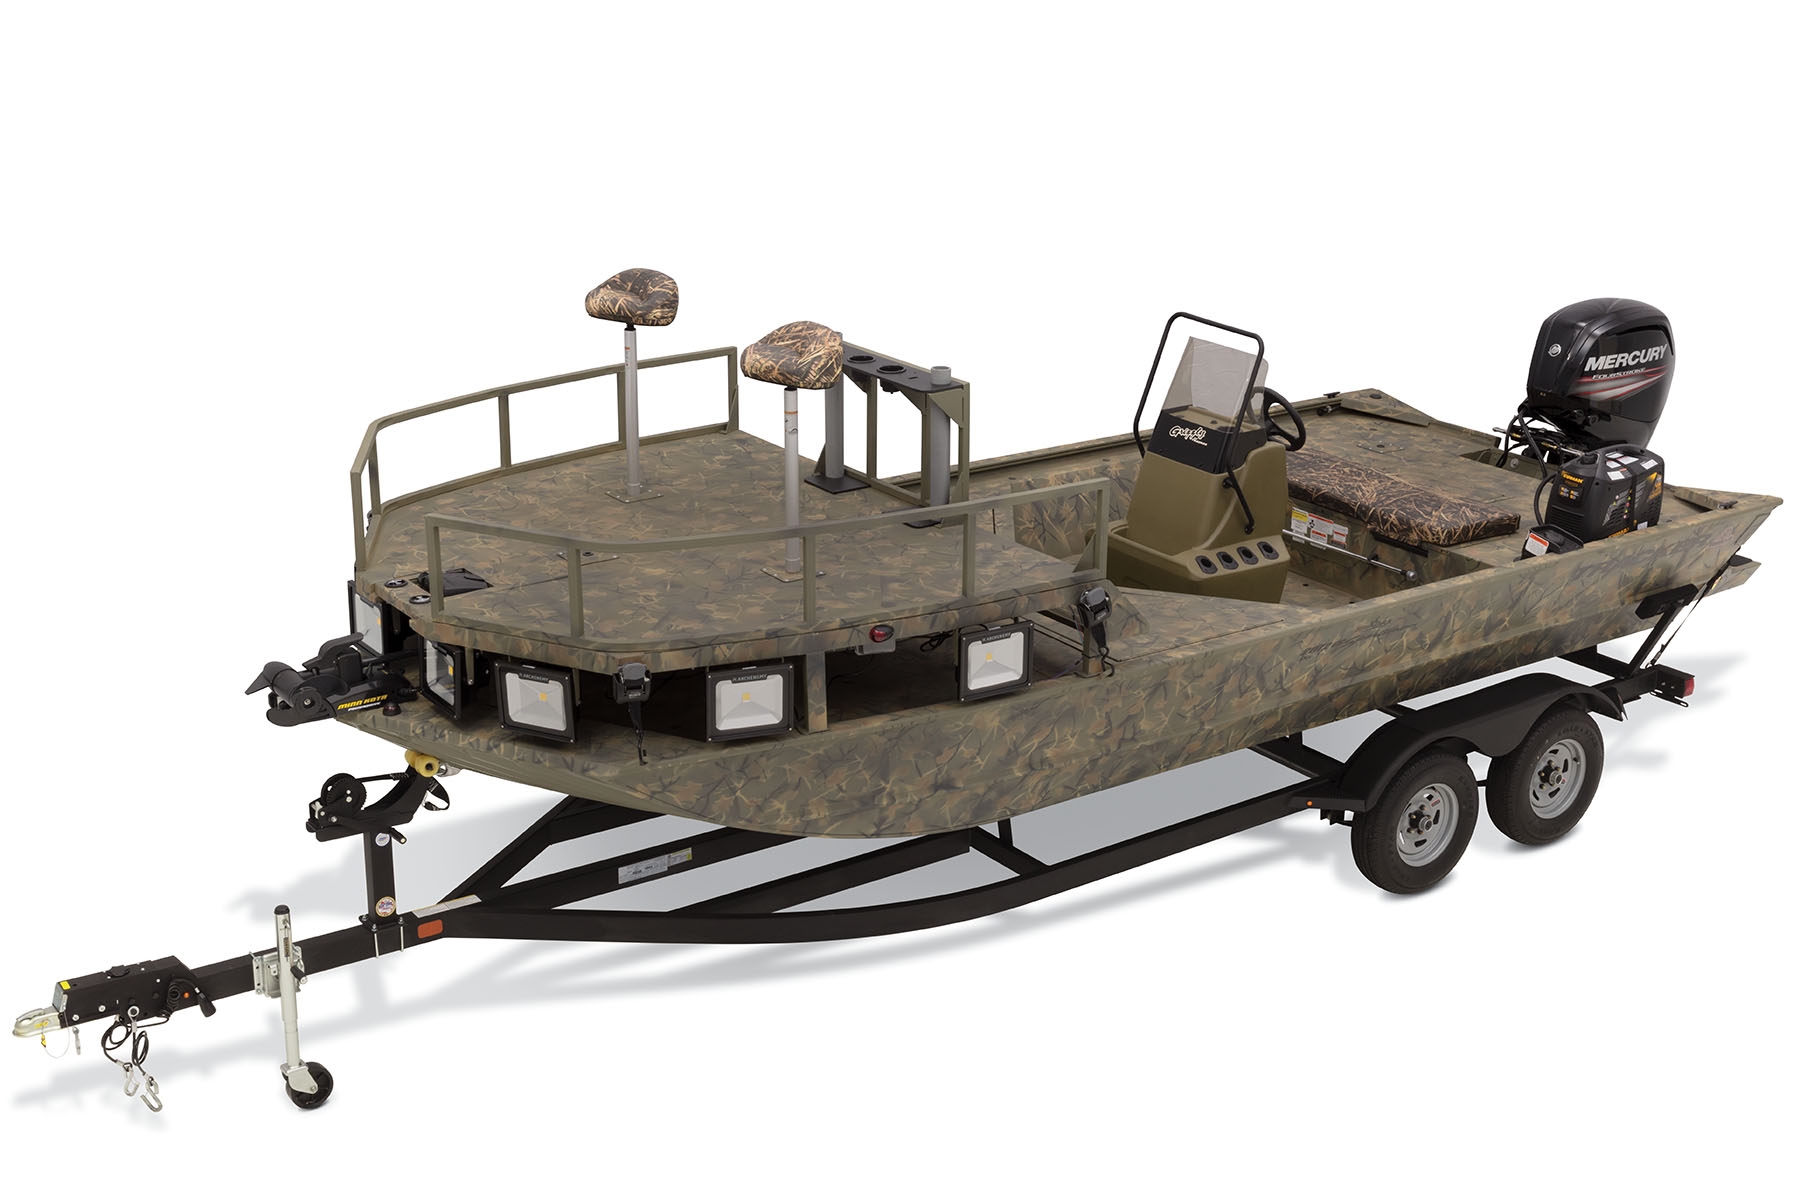 2020 GRIZZLY 2072 CC Sportsman - TRACKER Hunt and Fish Jon Boat